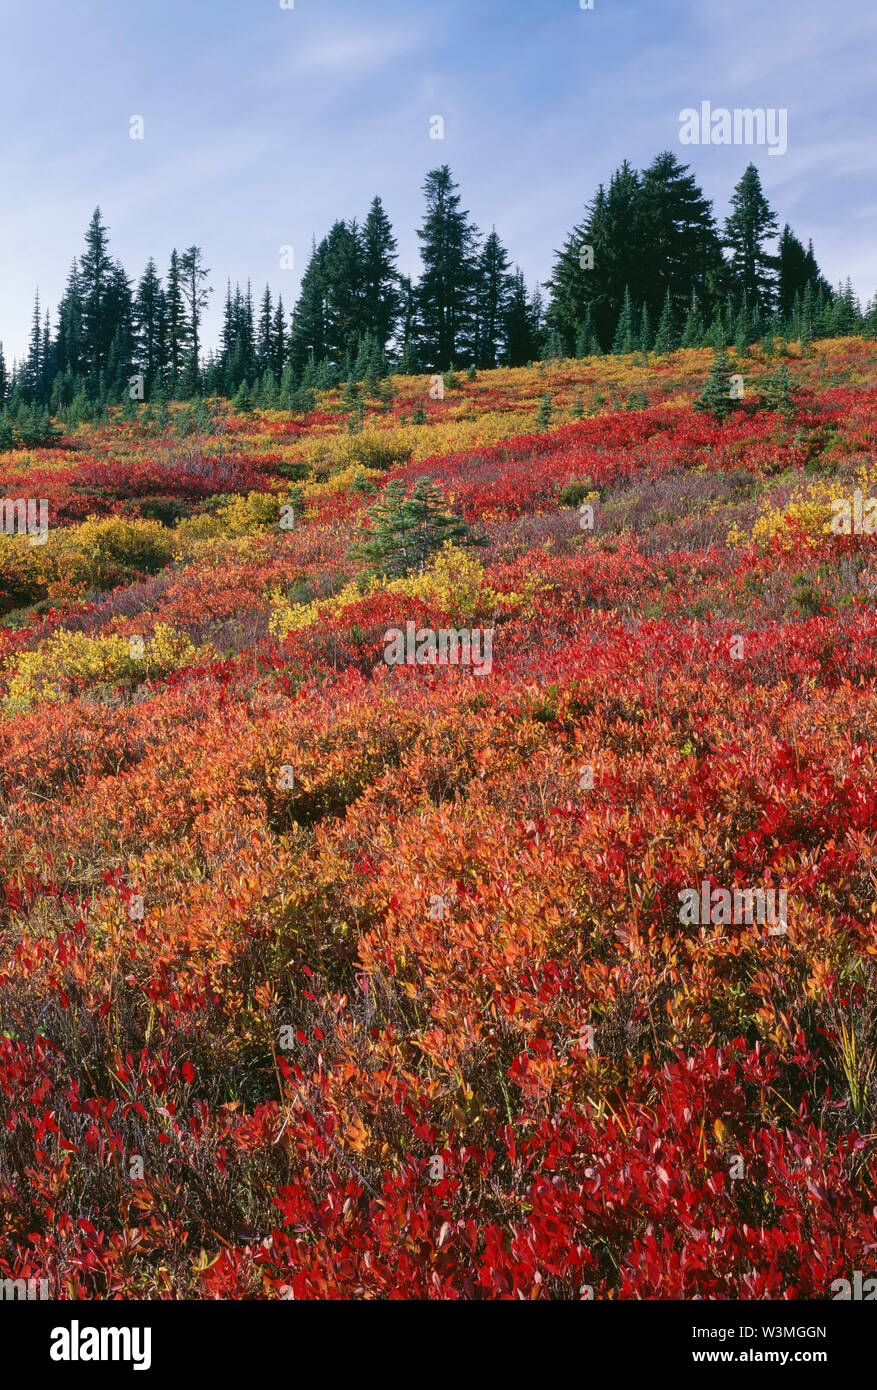 USA, Washington, Mt. Rainier National Park, Huckleberry and blueberry with vibrant autumn color and distant evergreen trees, Paradise area. Stock Photo